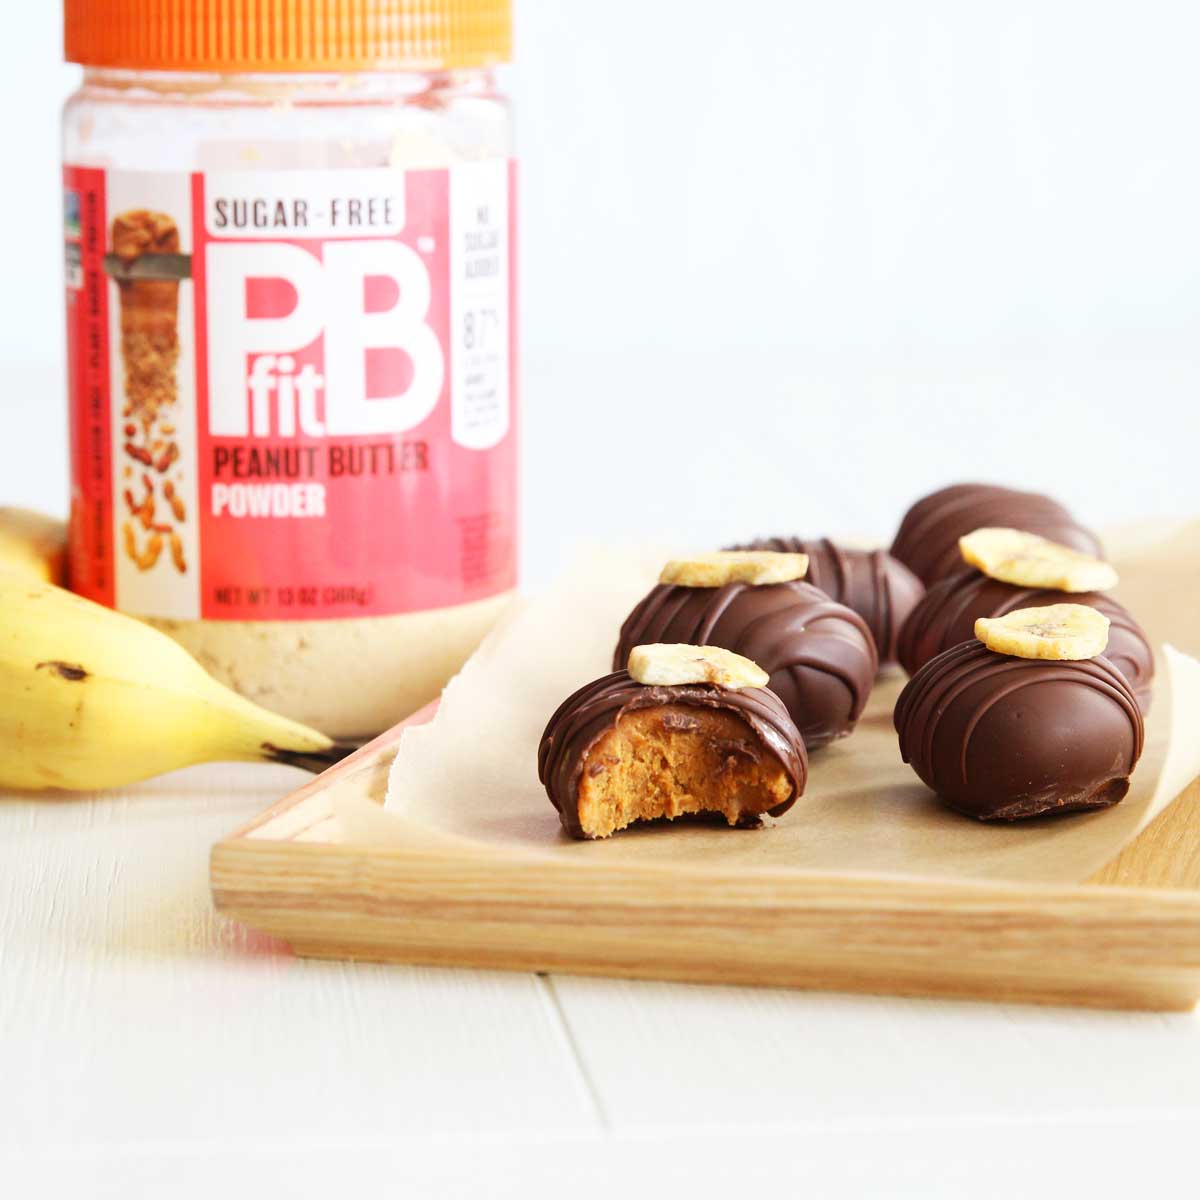 Easy & Delicious Banana Chocolate Easter Eggs Recipe with PB Fit - Only 3 Ingredients! - Peanut Butter Easter Eggs